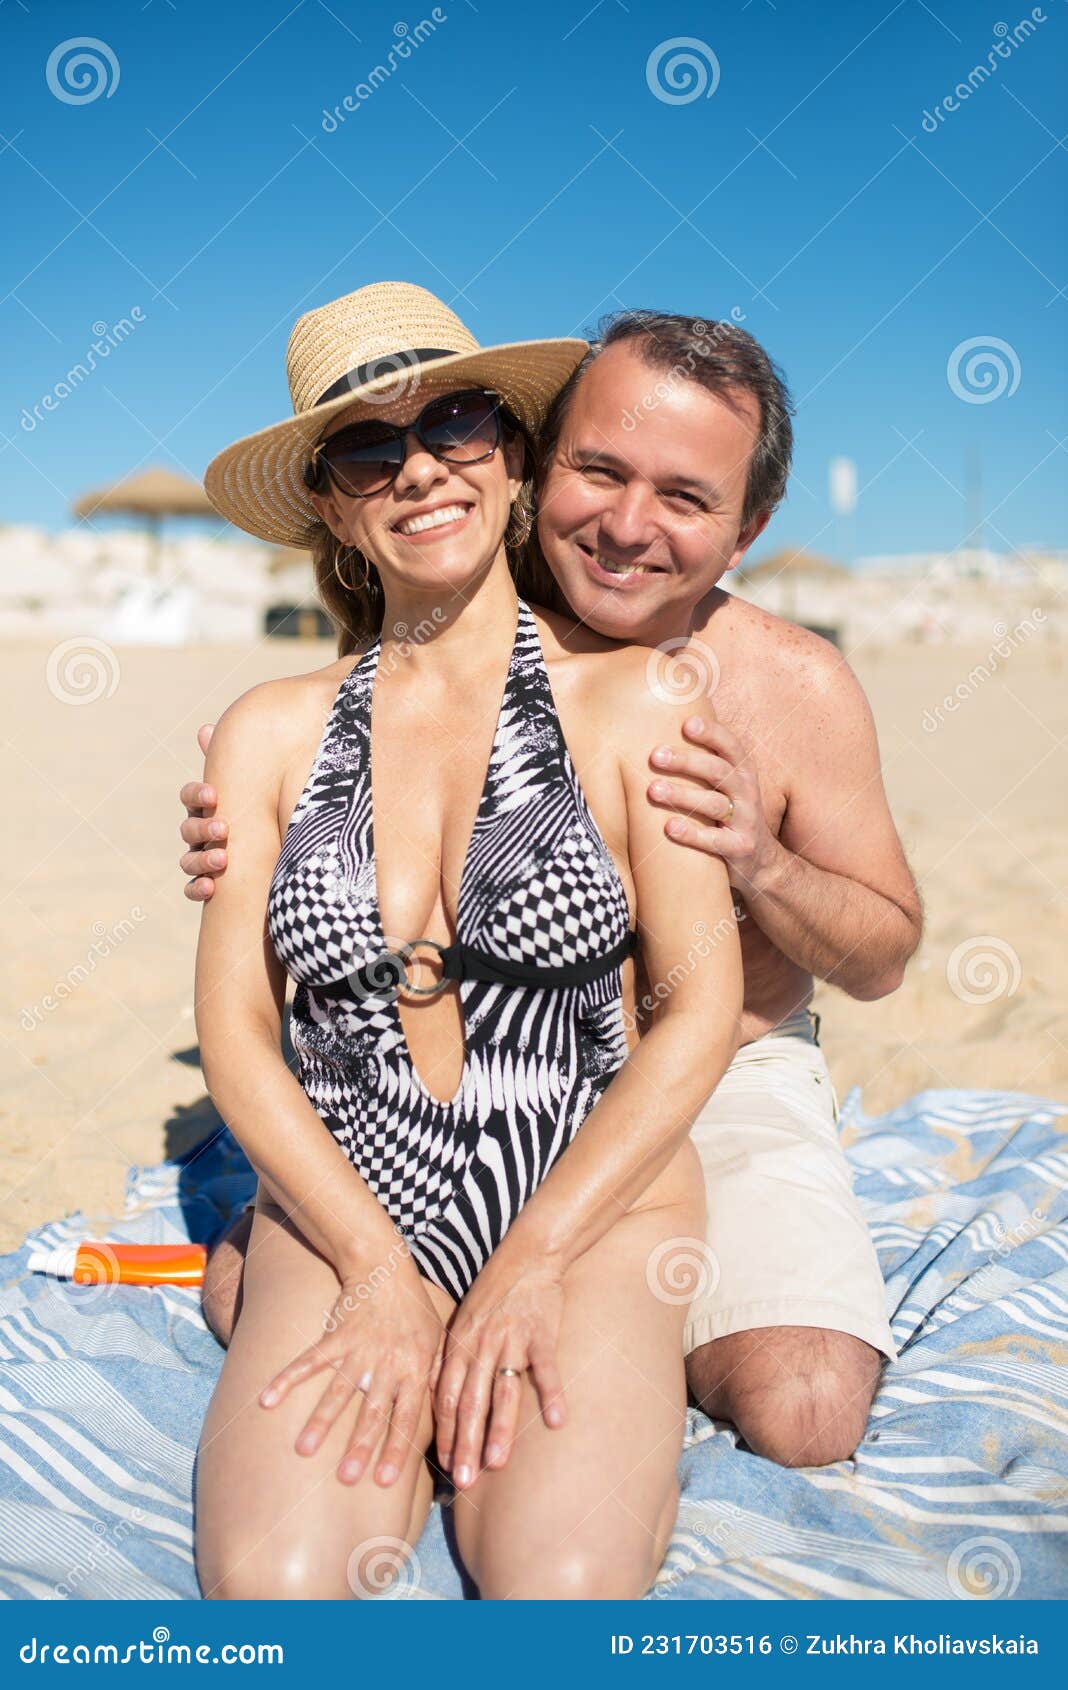 Husband And Wife Adult Vacation